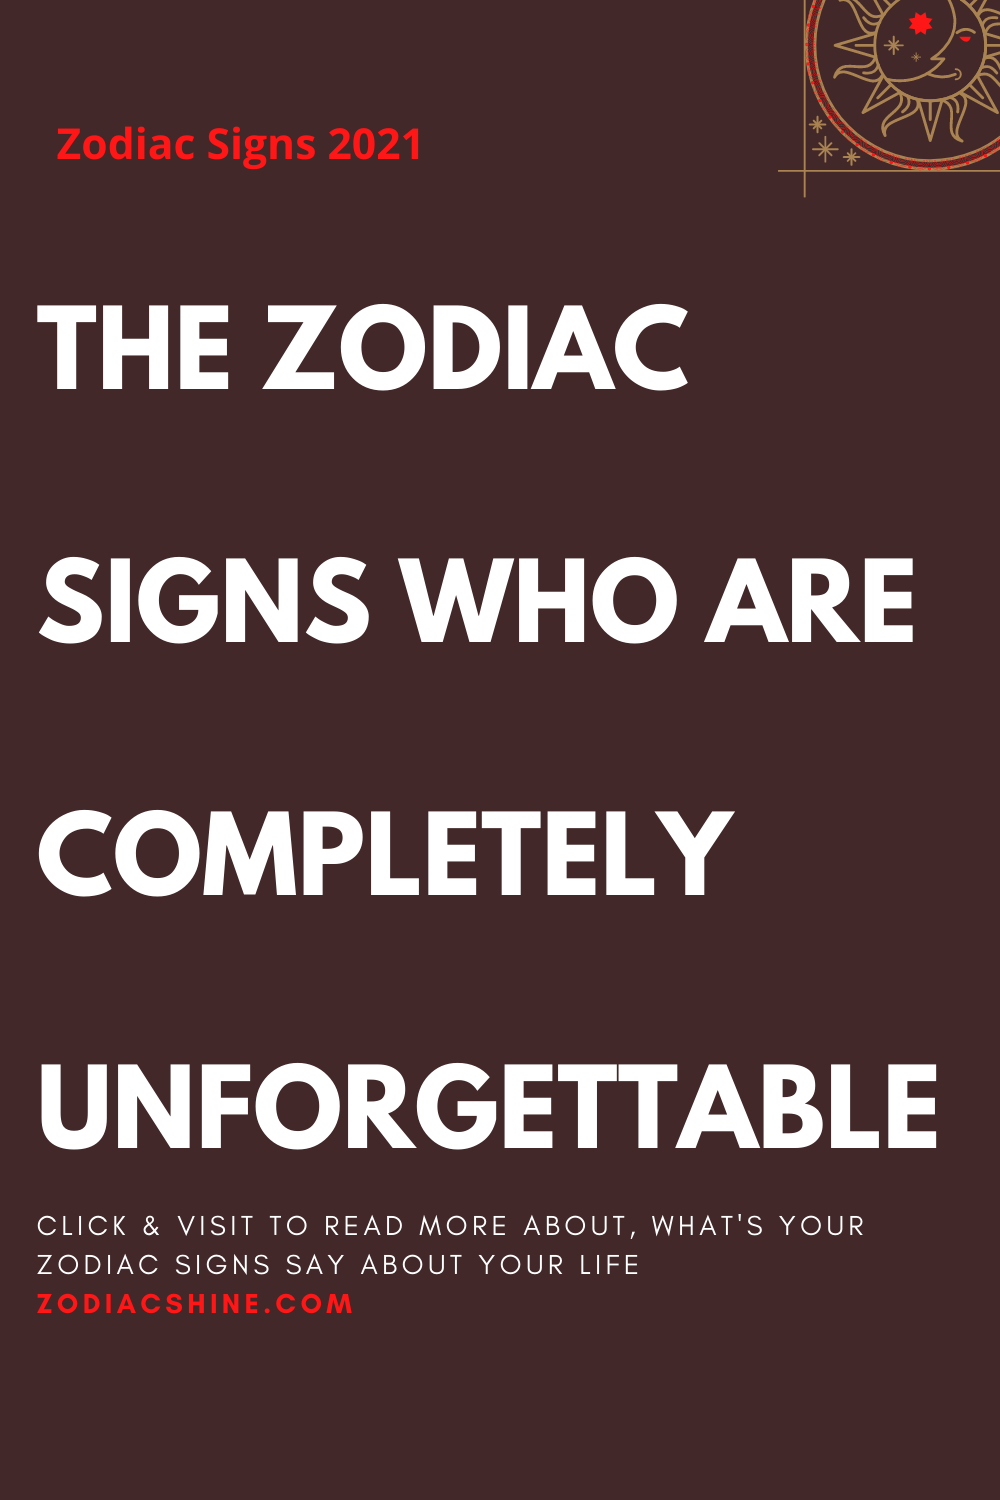 THE ZODIAC SIGNS WHO ARE COMPLETELY UNFORGETTABLE – Zodiac Shine